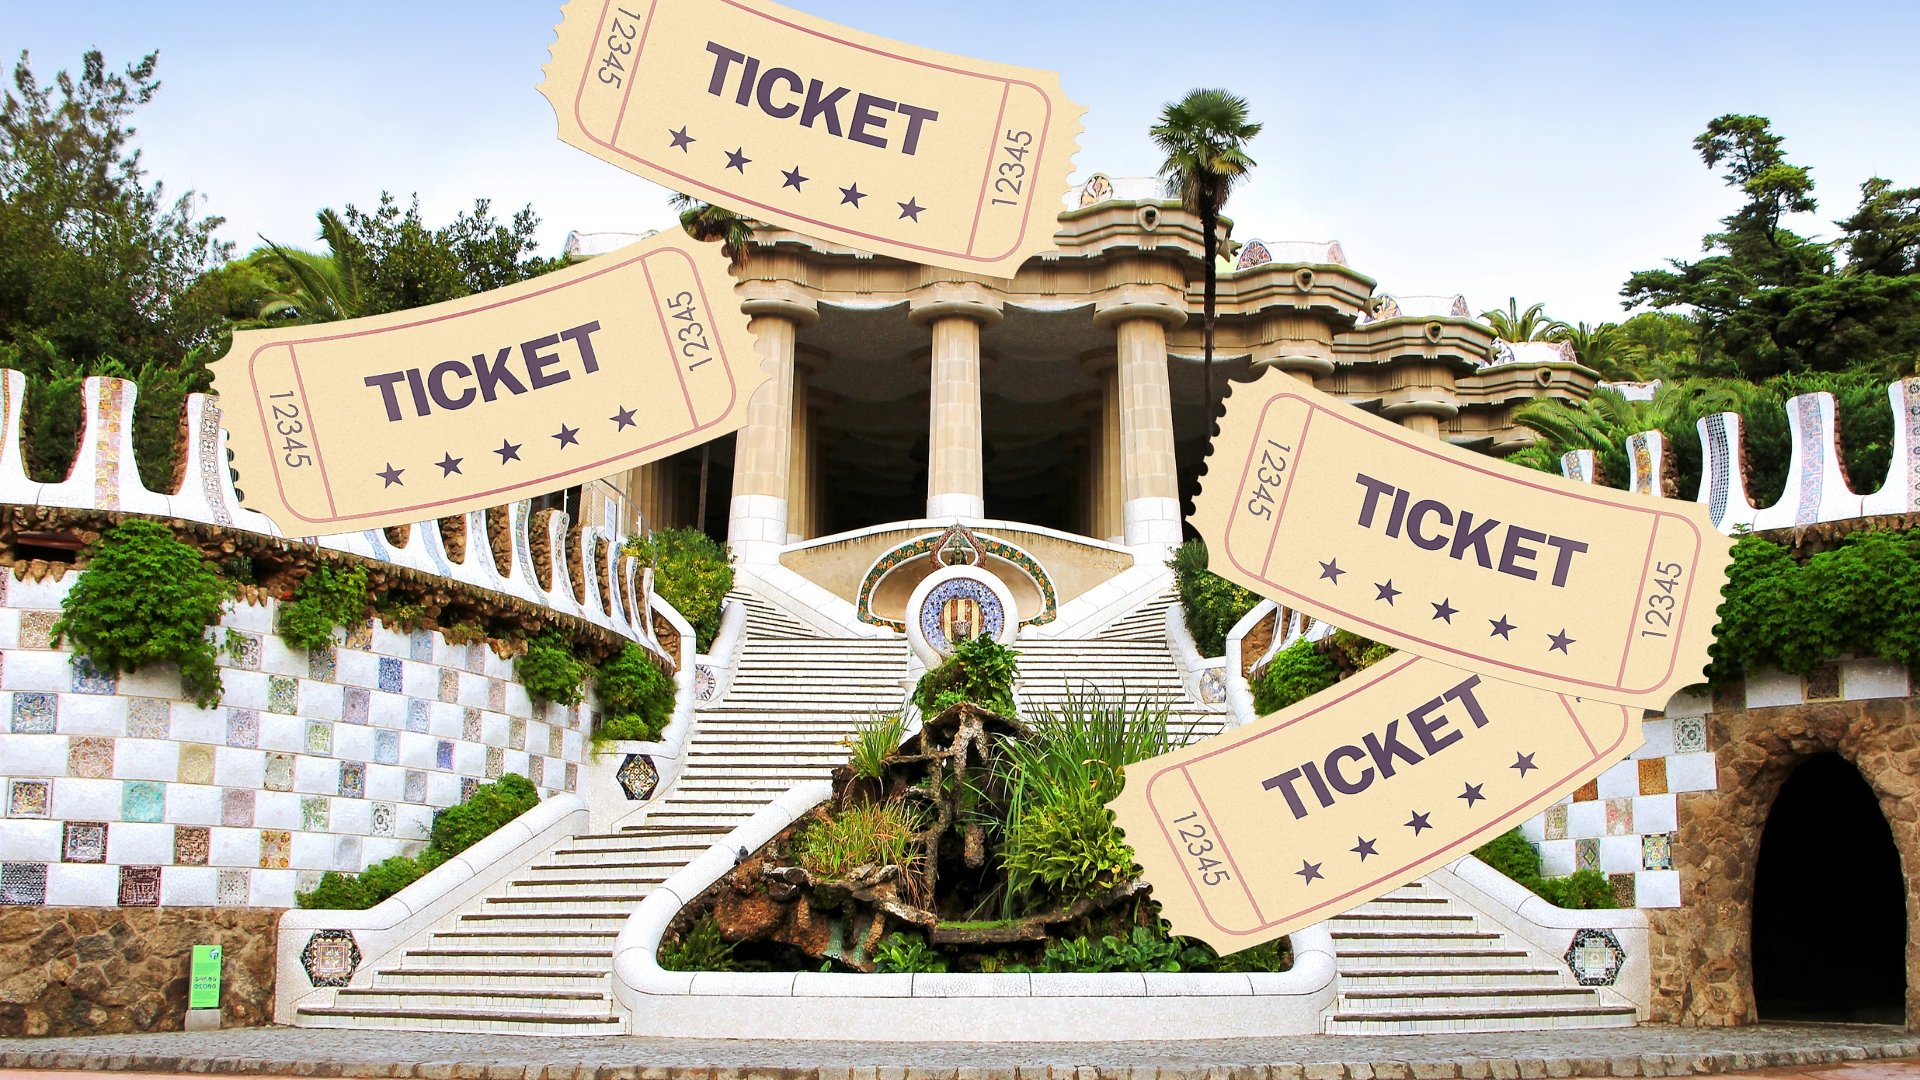 All about Park Güell: tickets, when to go and what to see in Barcelona's special spot